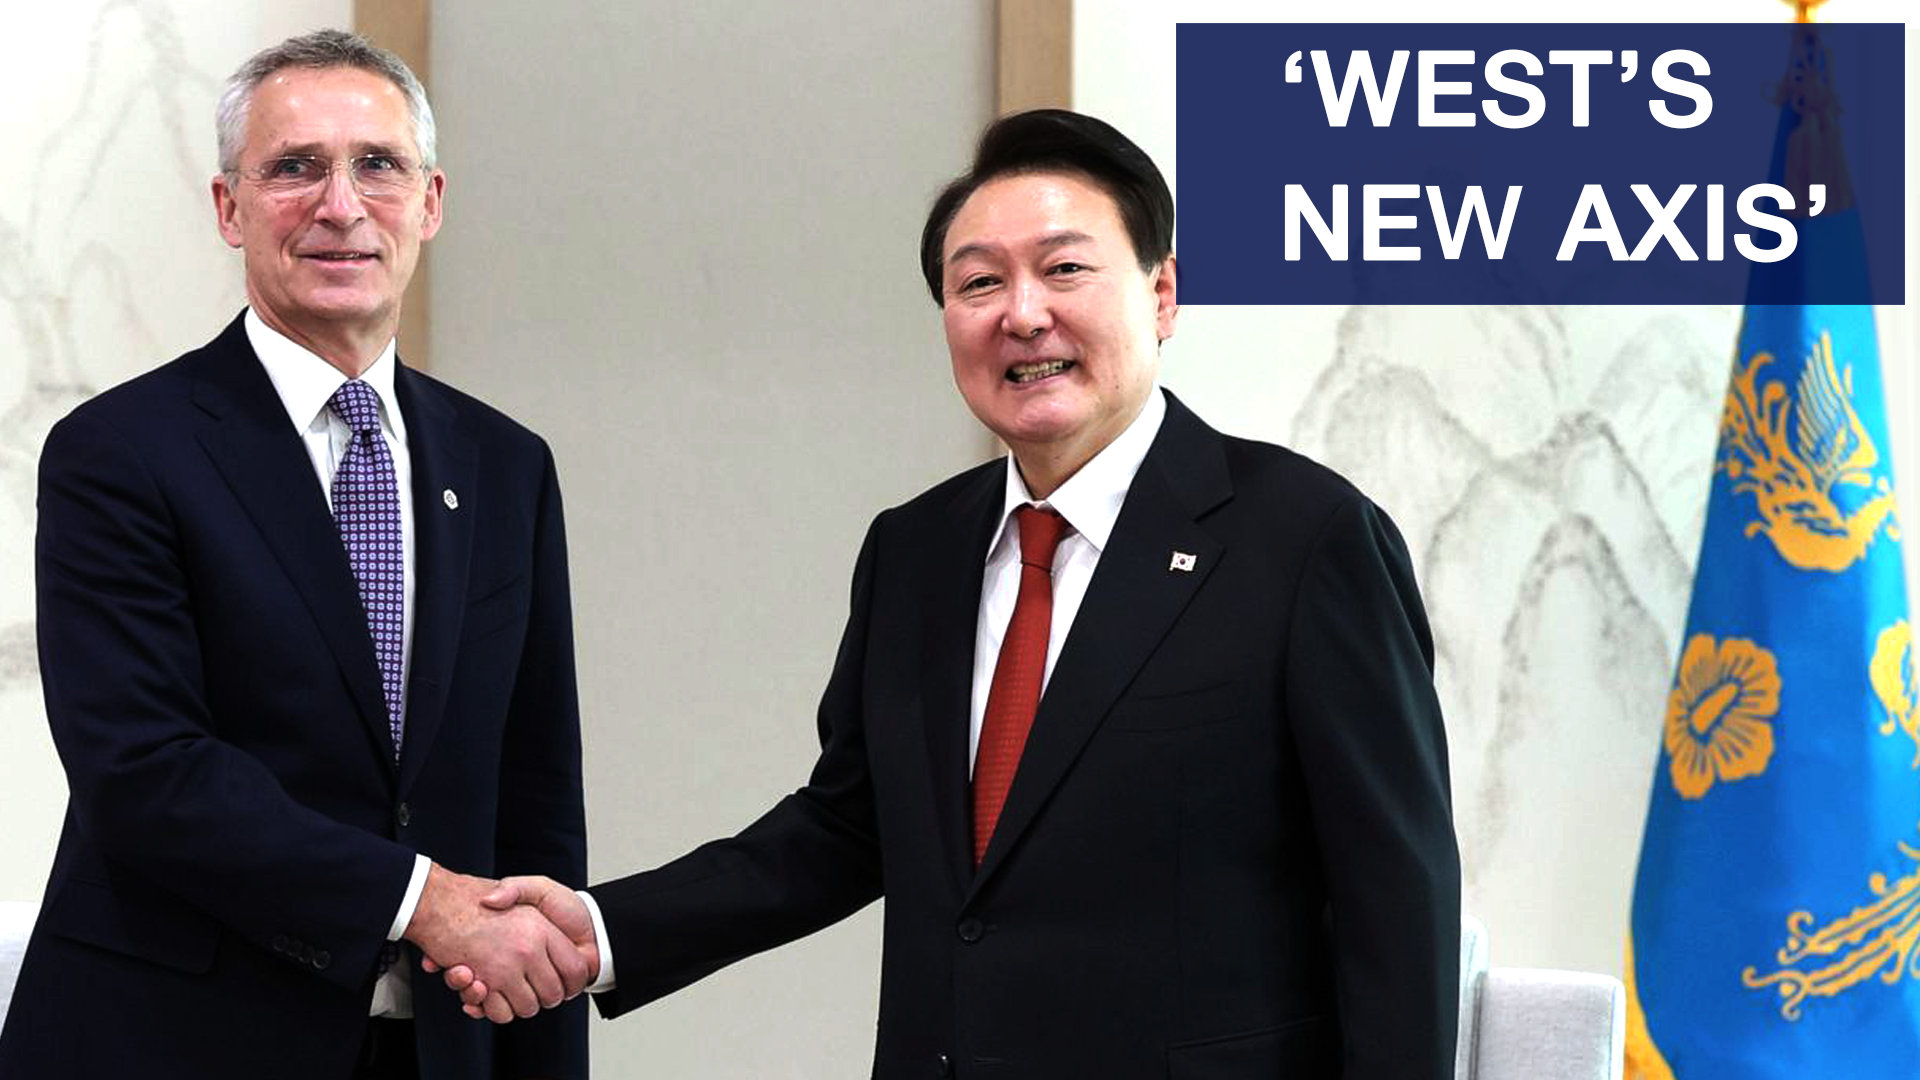 "West’s new axis"